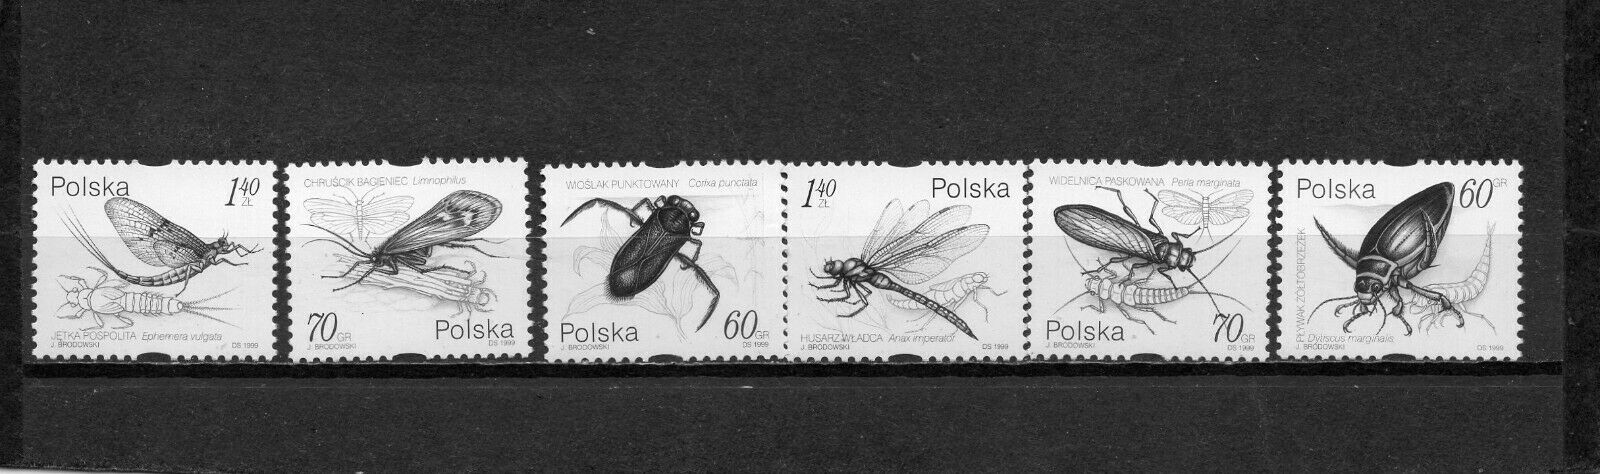 Poland 1999 Insects Set Of 6 Stamps Mnh